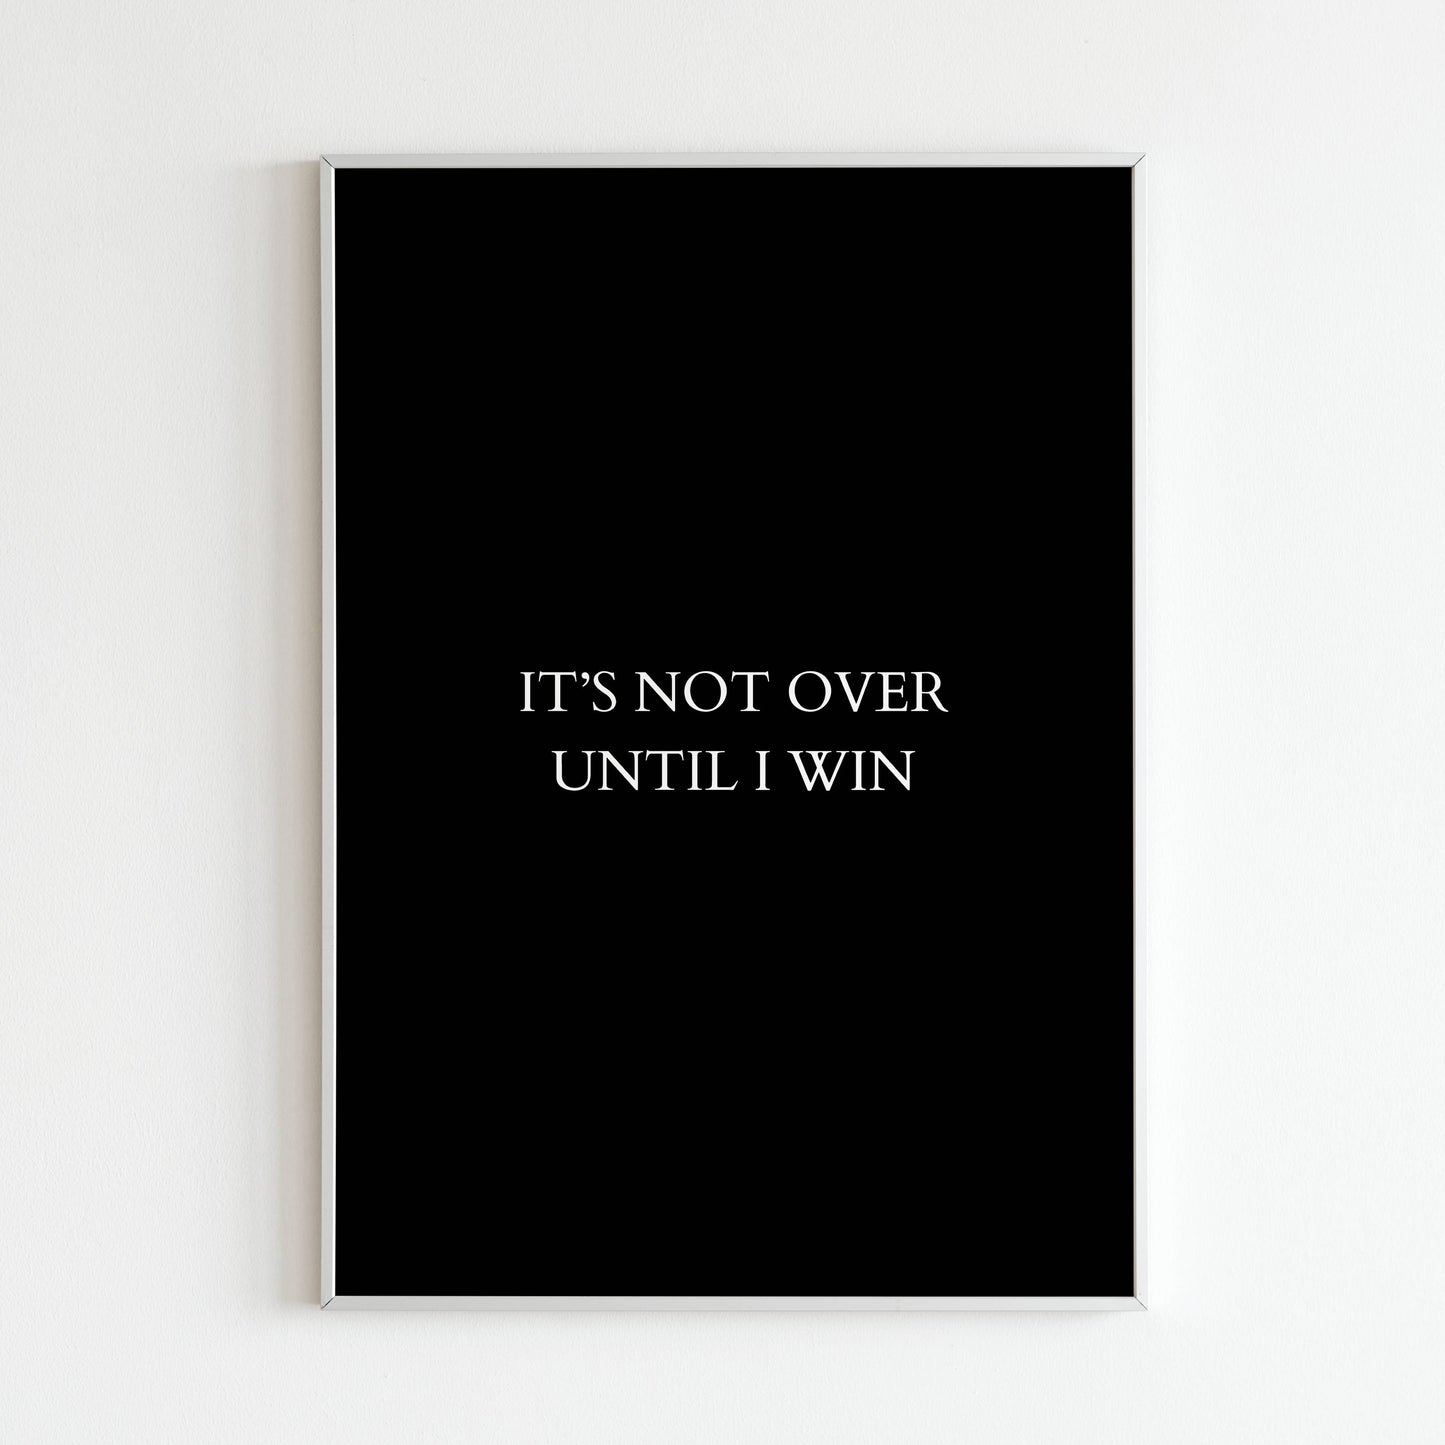 Downloadable Vince Lombardi quote "It's not over until I win" wall art.